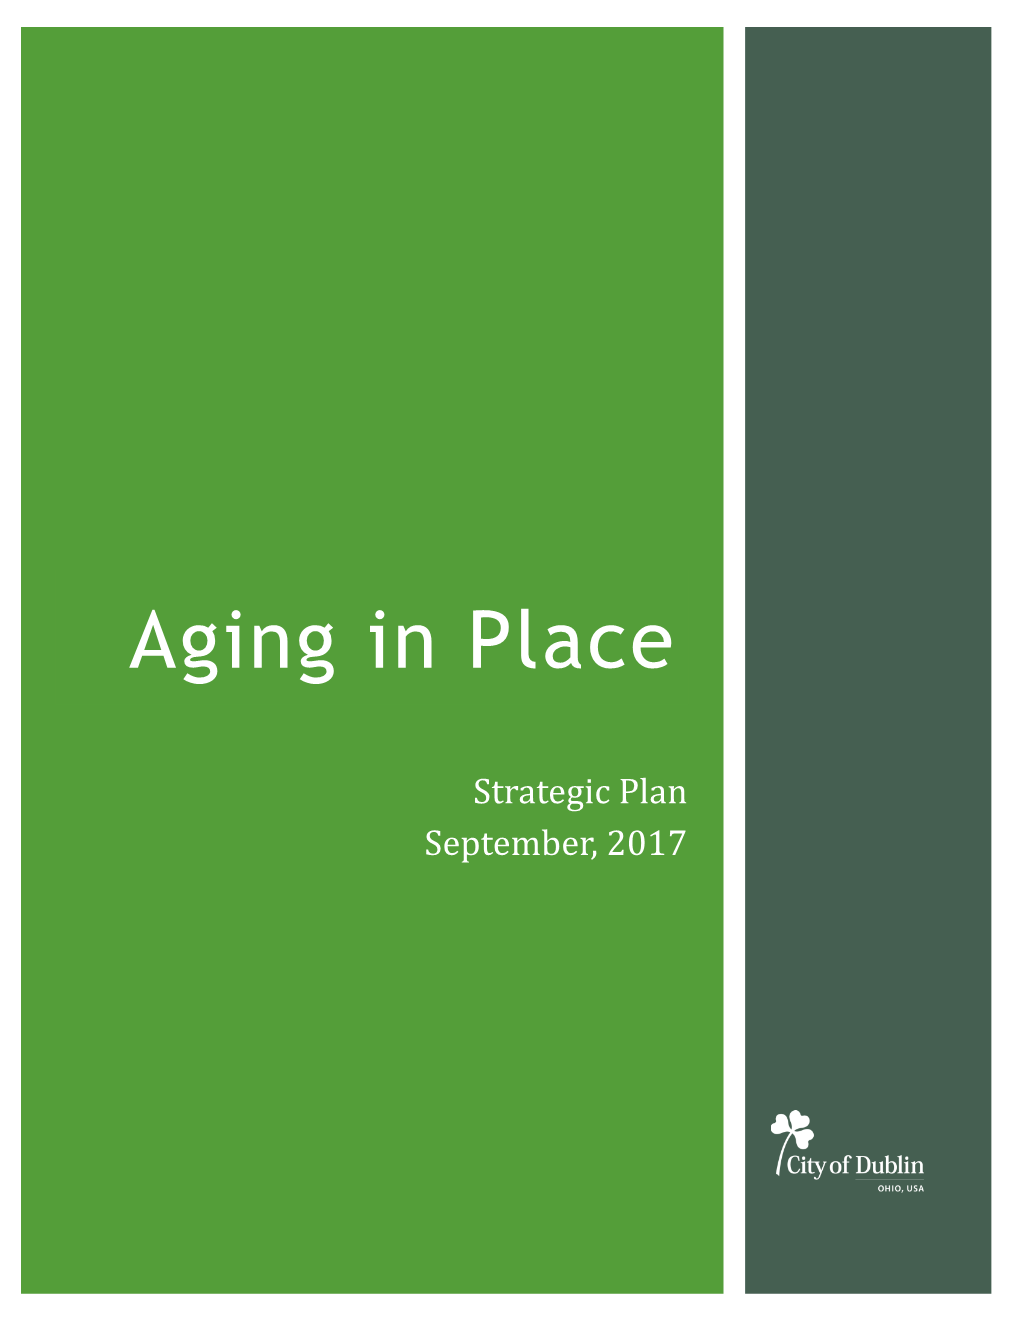 City's Aging in Place Plan